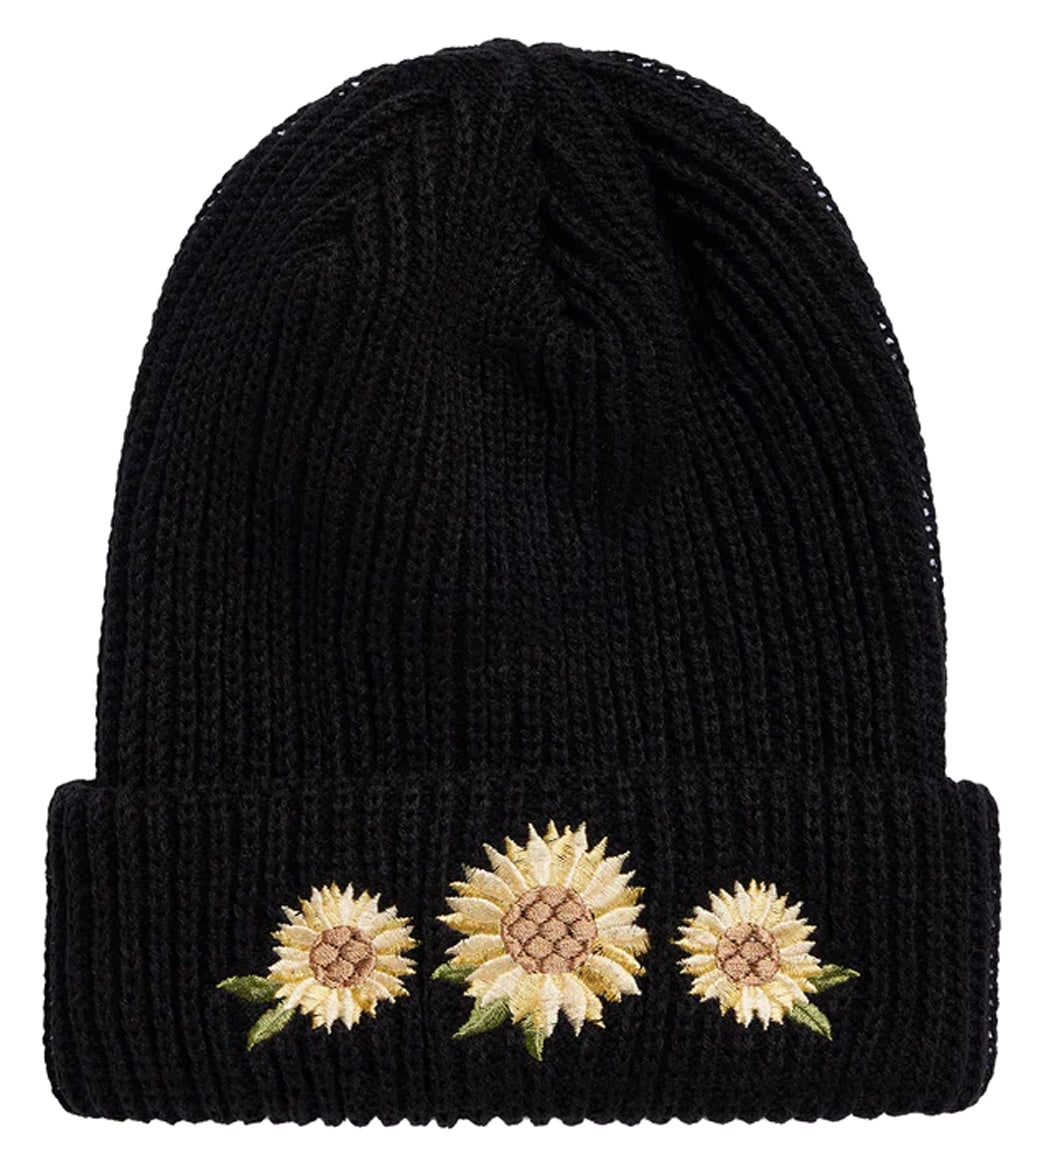 ONeill Womens Groceries Embroidery Beanie